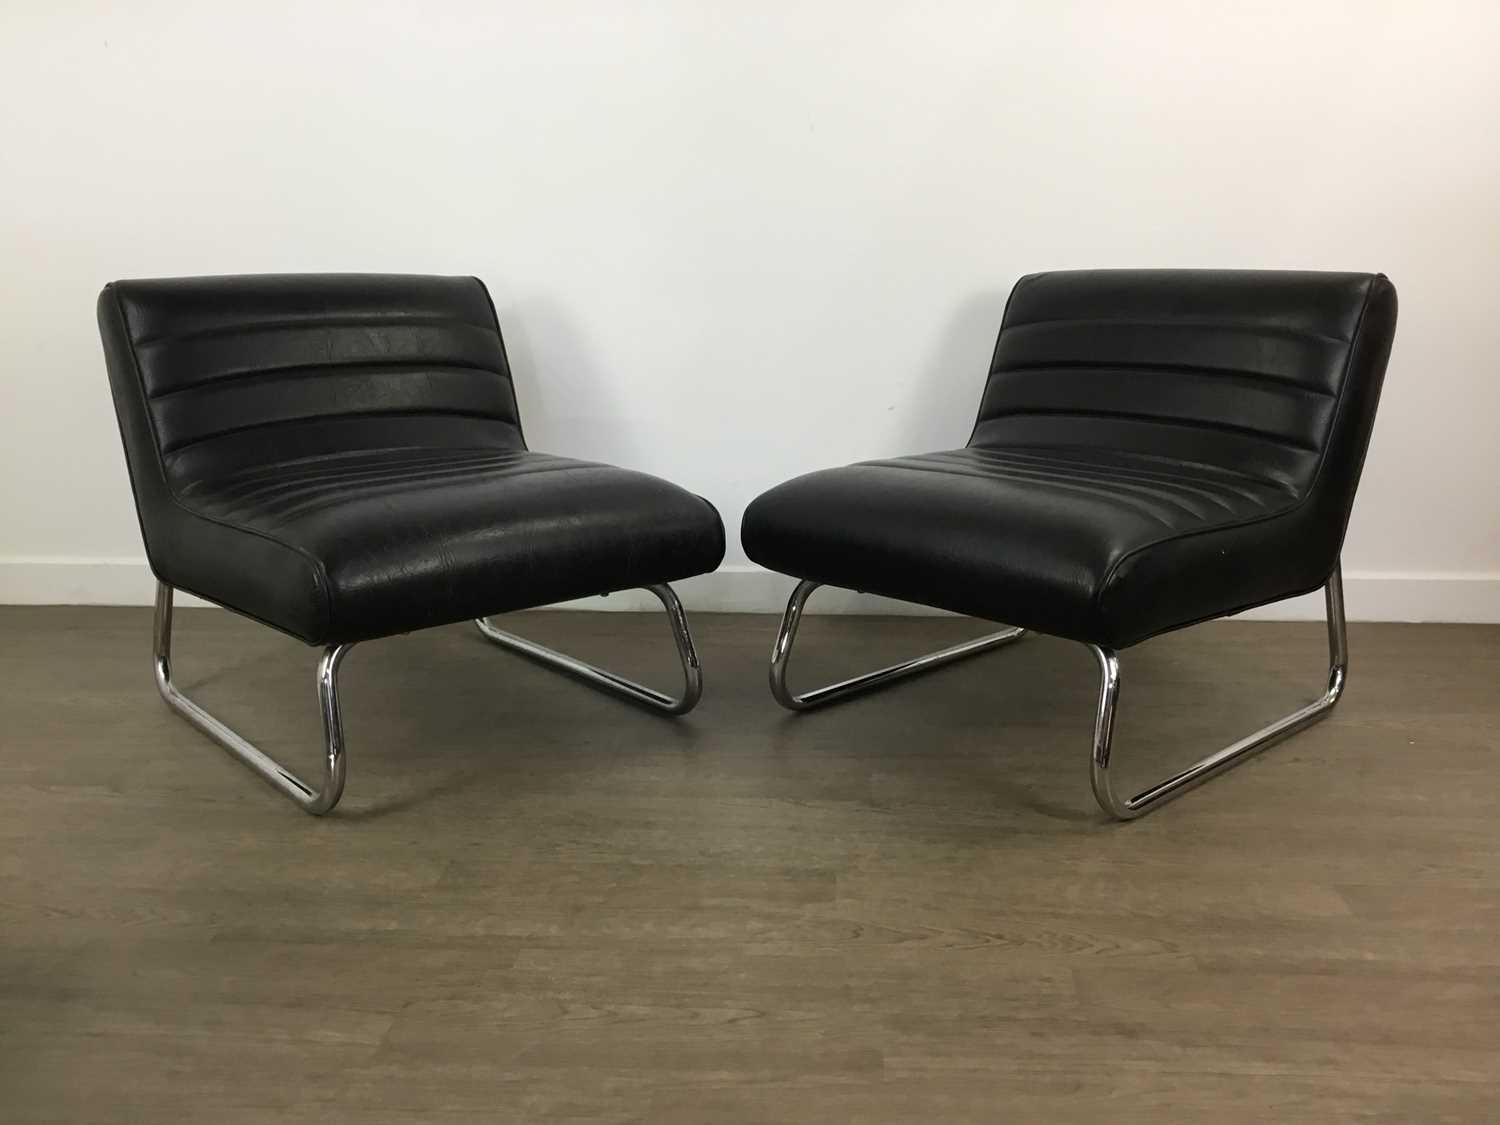 SET OF FOUR MID CENTURY LOUNGE CHAIRS, ALONG WITH A COFFEE TABLE